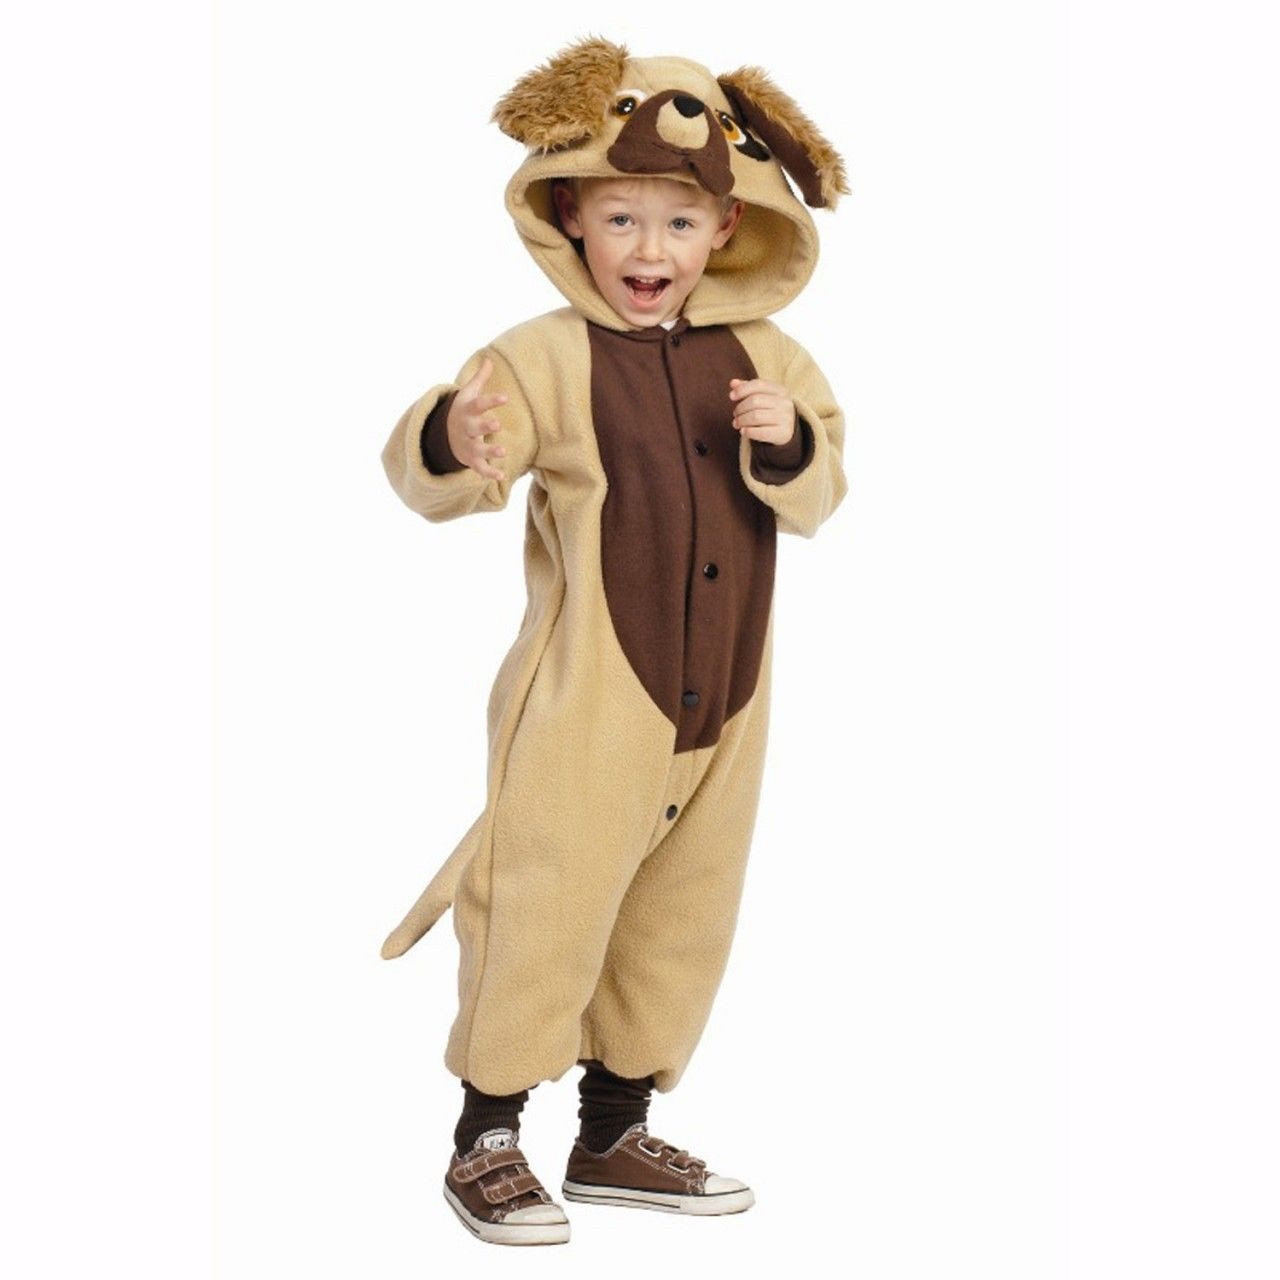 DIY Dog Costume For Kids
 Pin by Nancy Meadows on Costumes